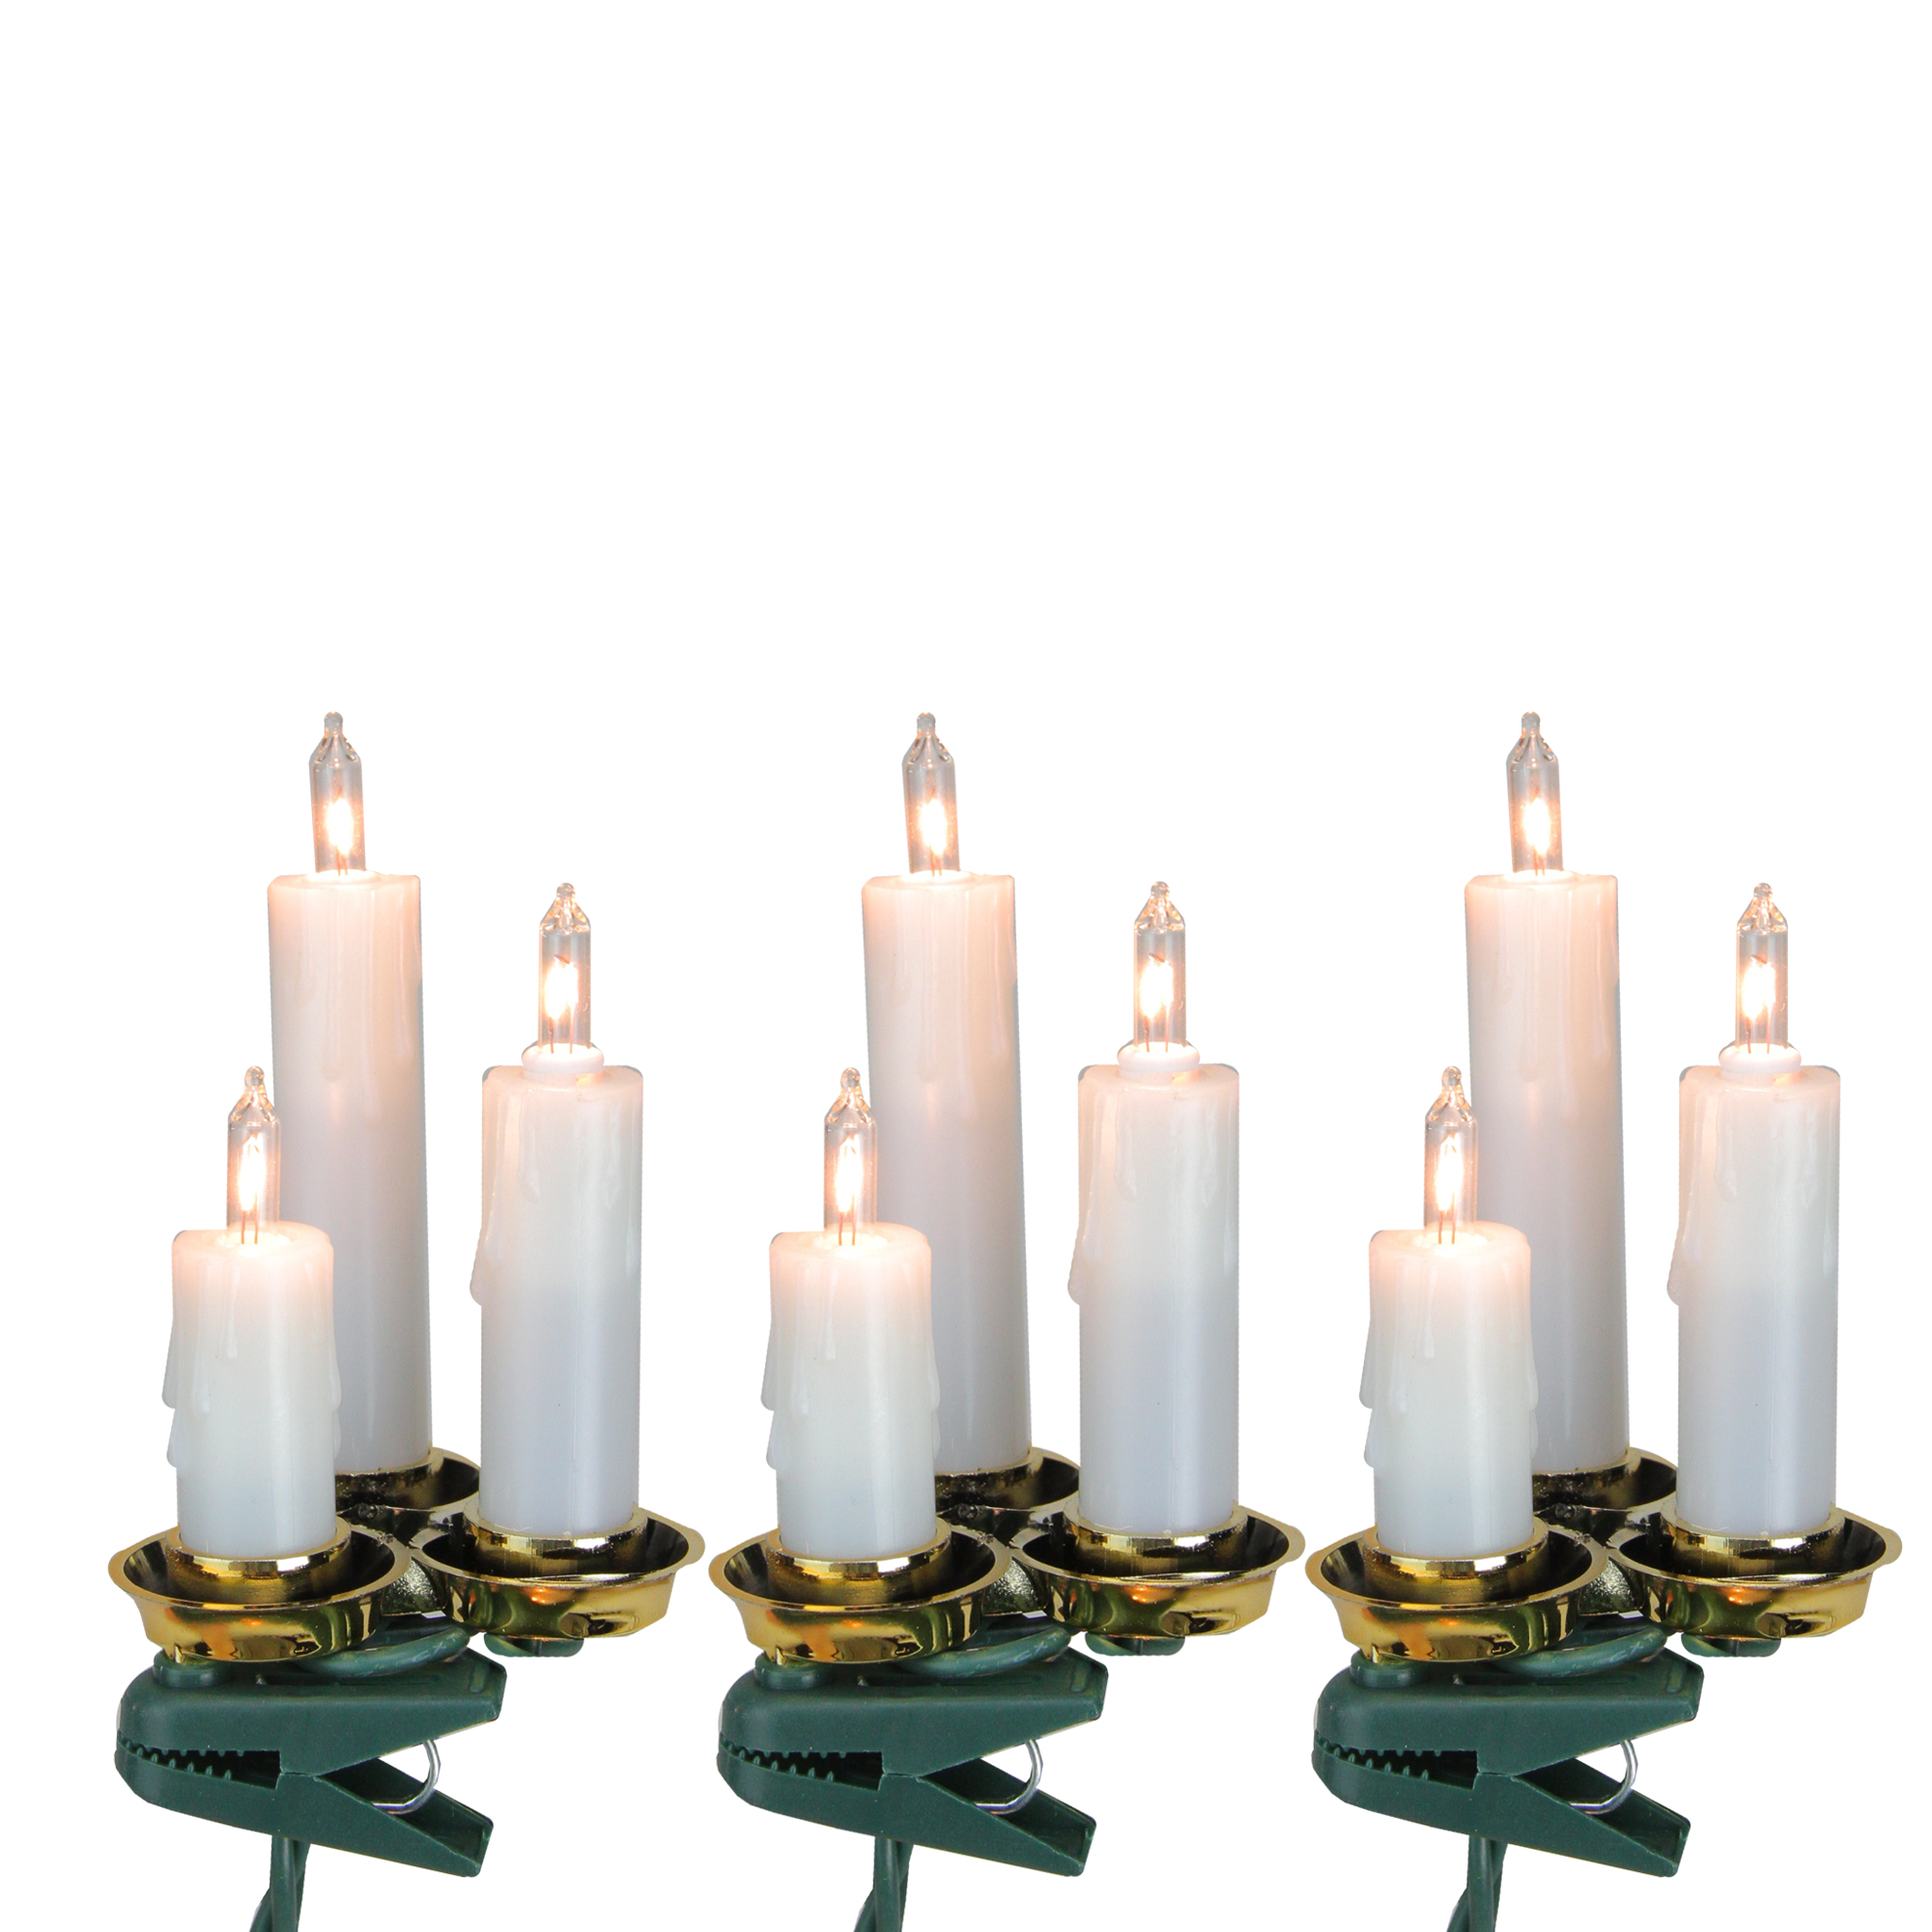 Dripping candle clip on lights for Christmas tree.